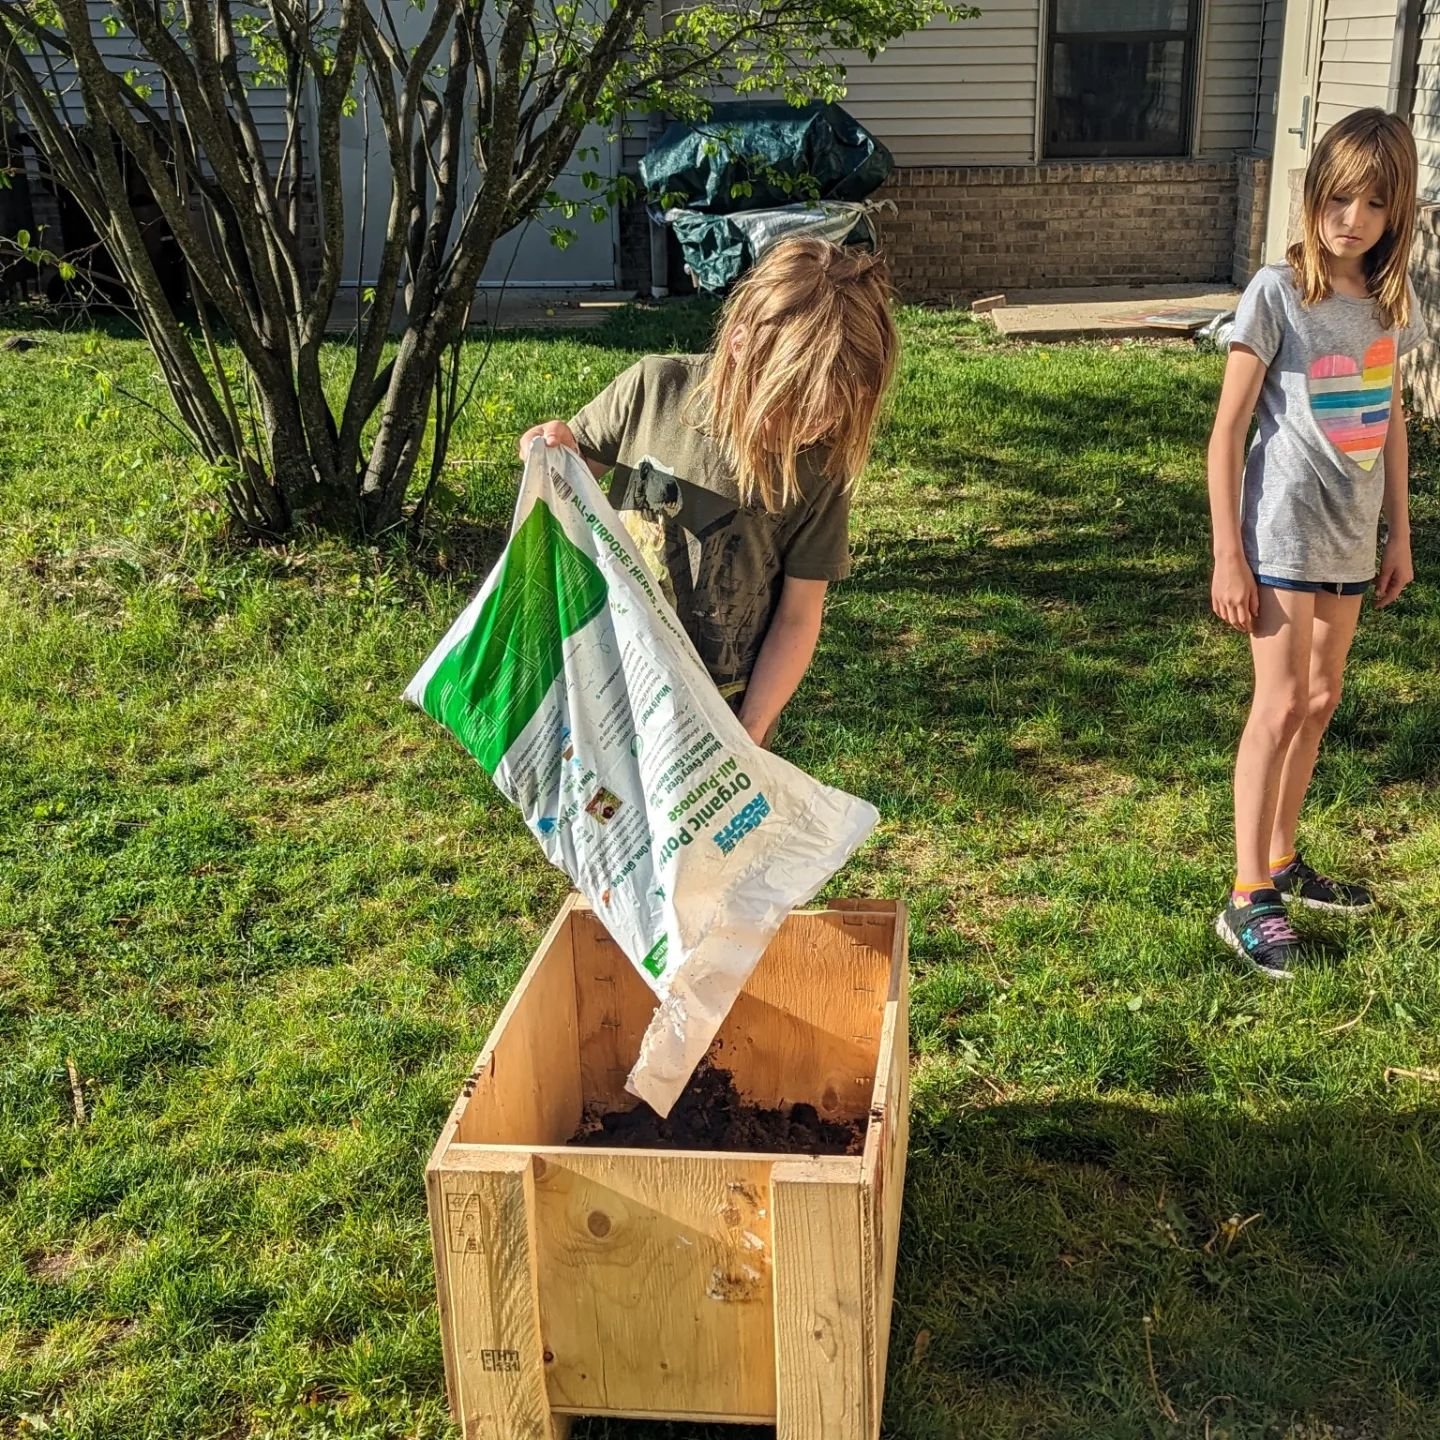 🌱🌿 Today, our learners at @actoncolumbus rolled up their sleeves and got their hands dirty! 

They set up raised garden beds, studied each seed with care, measured diligently, and planted them just right, giving each one the space it needs to thriv